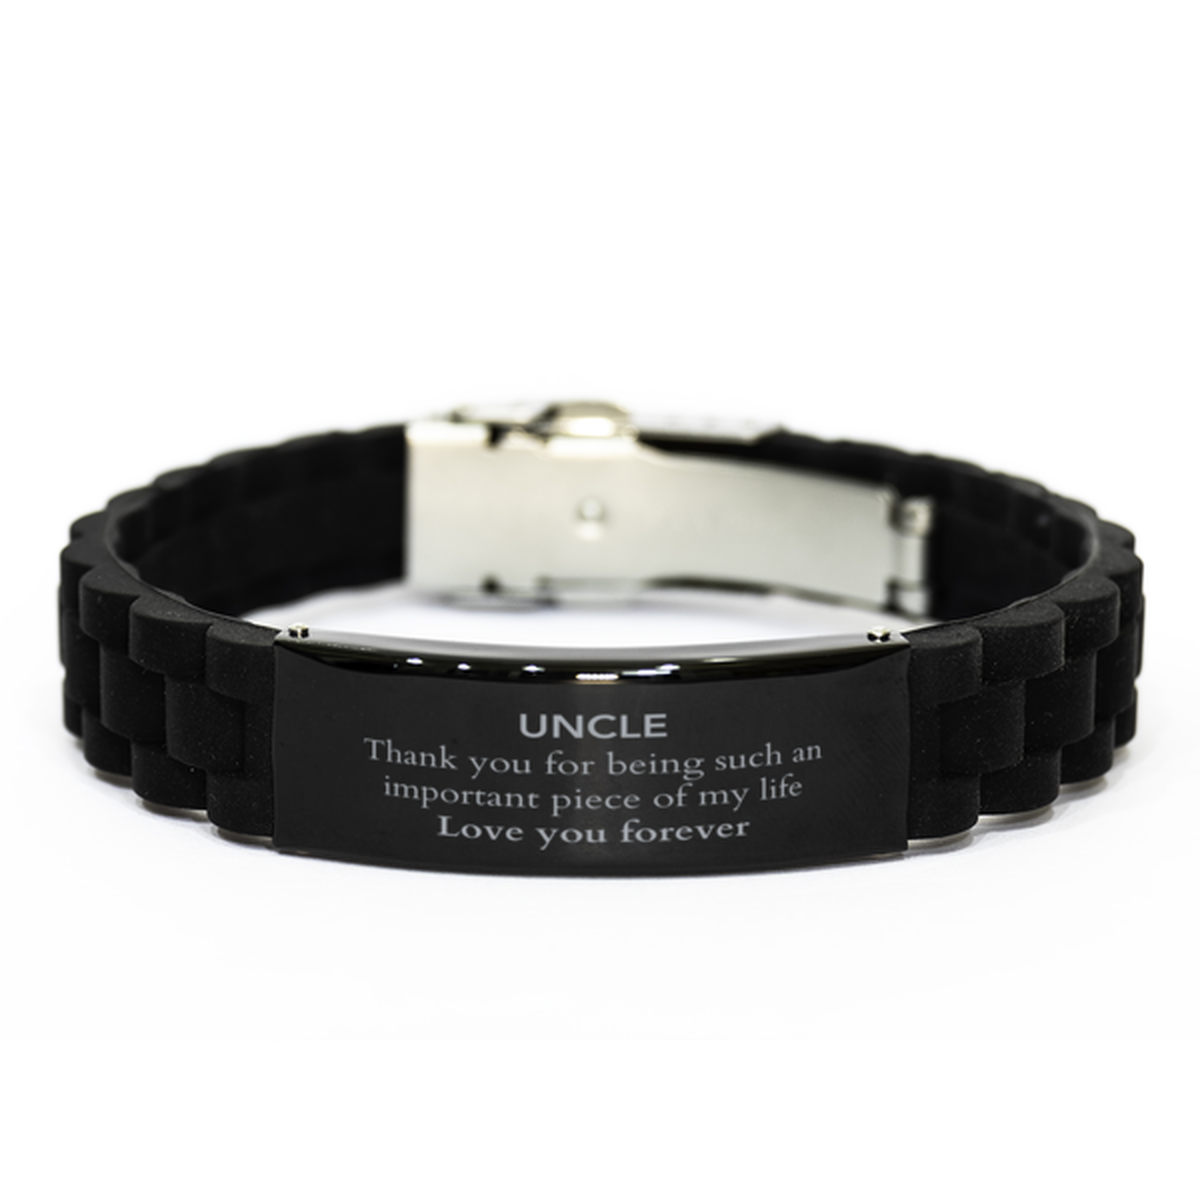 Appropriate Uncle Black Glidelock Clasp Bracelet Epic Birthday Gifts for Uncle Thank you for being such an important piece of my life Uncle Christmas Mothers Fathers Day